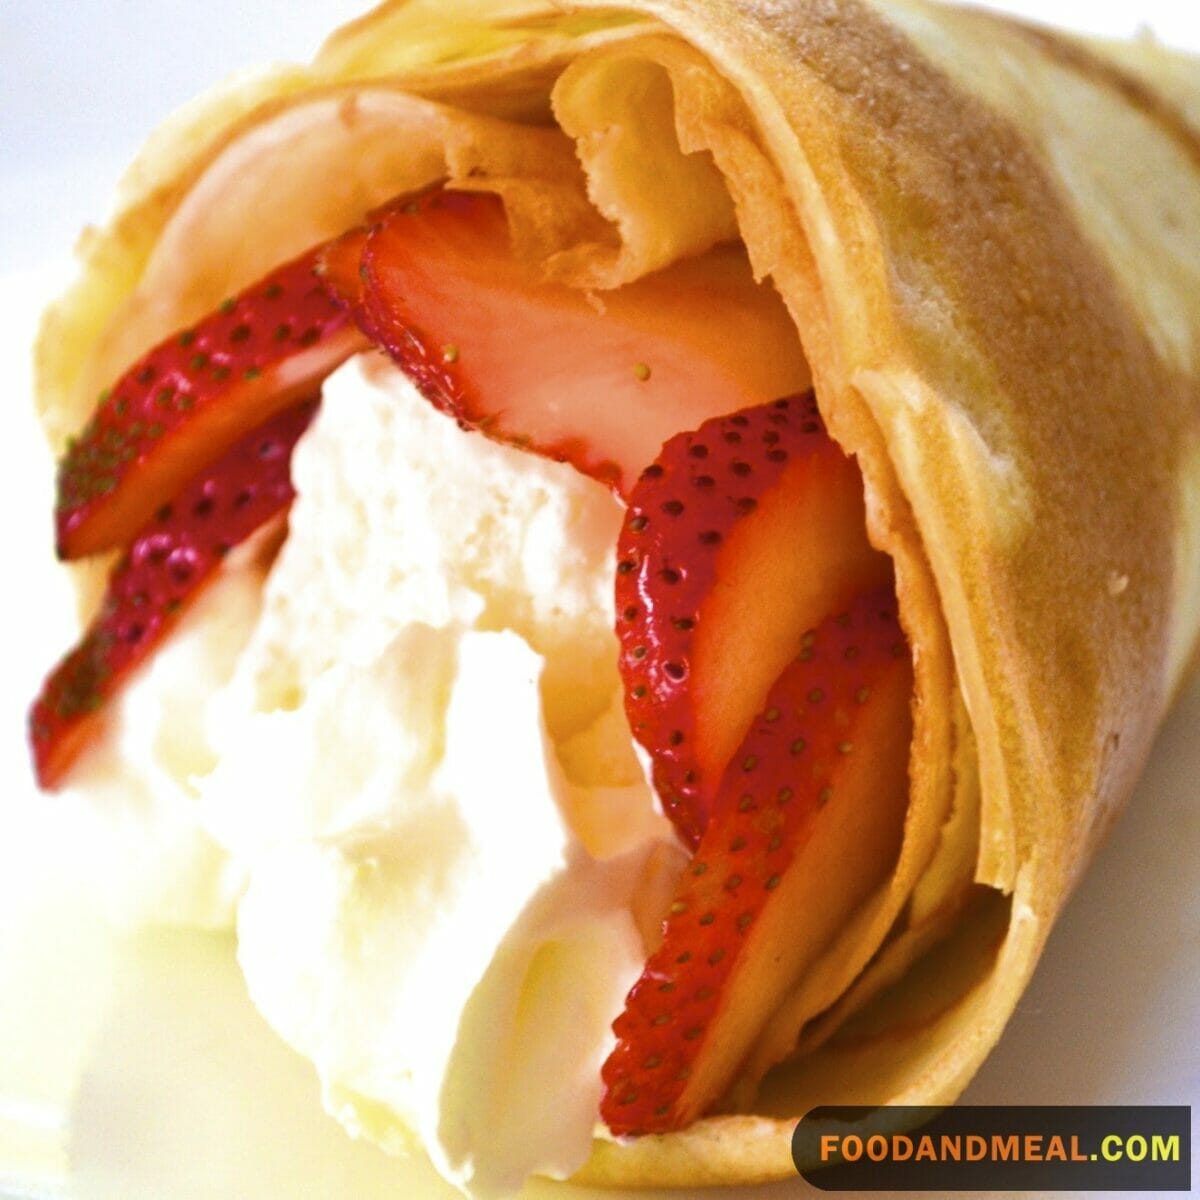 Japanese Street Crepes